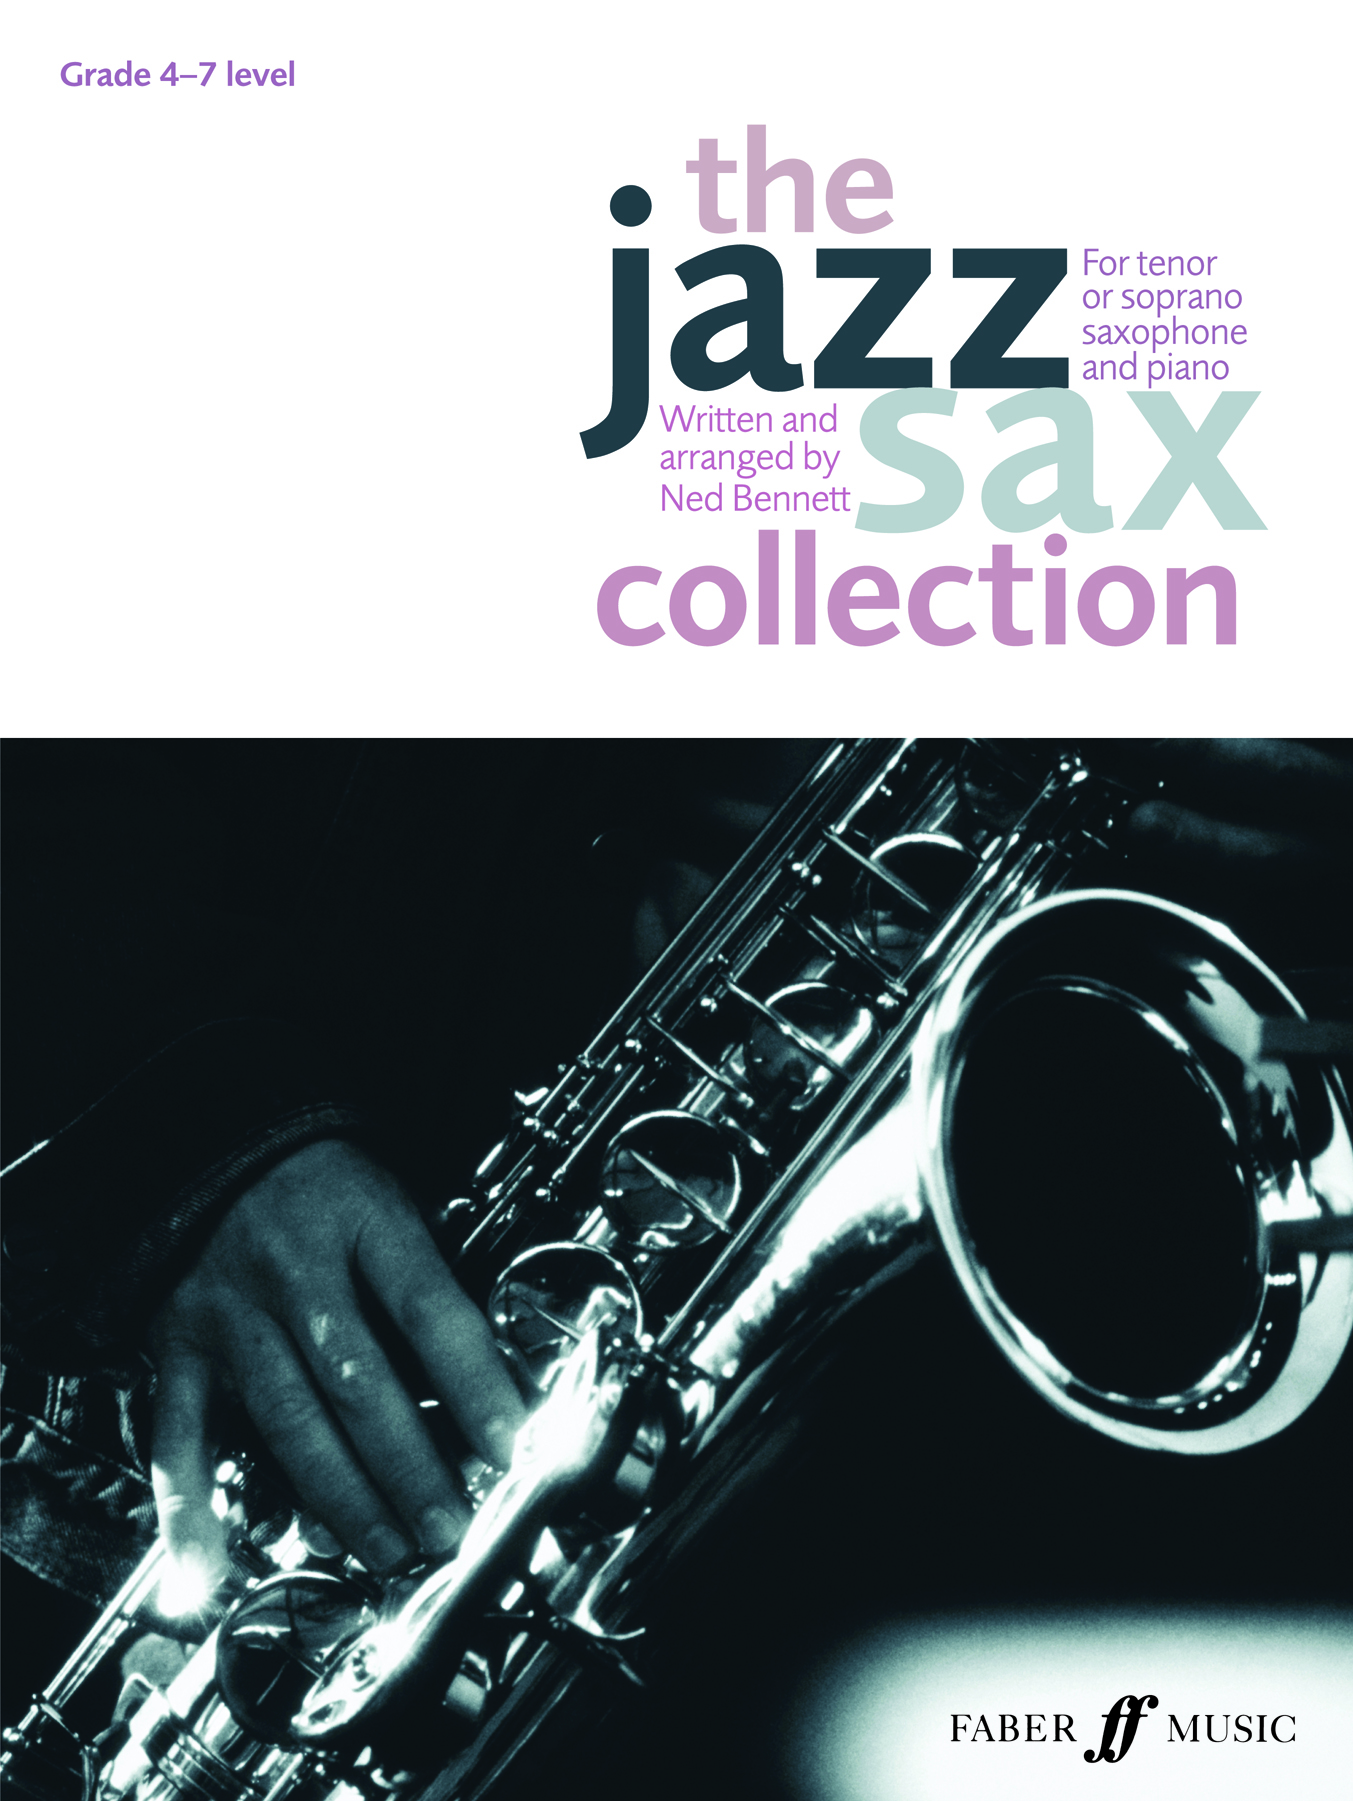 The Jazz Sax Collection